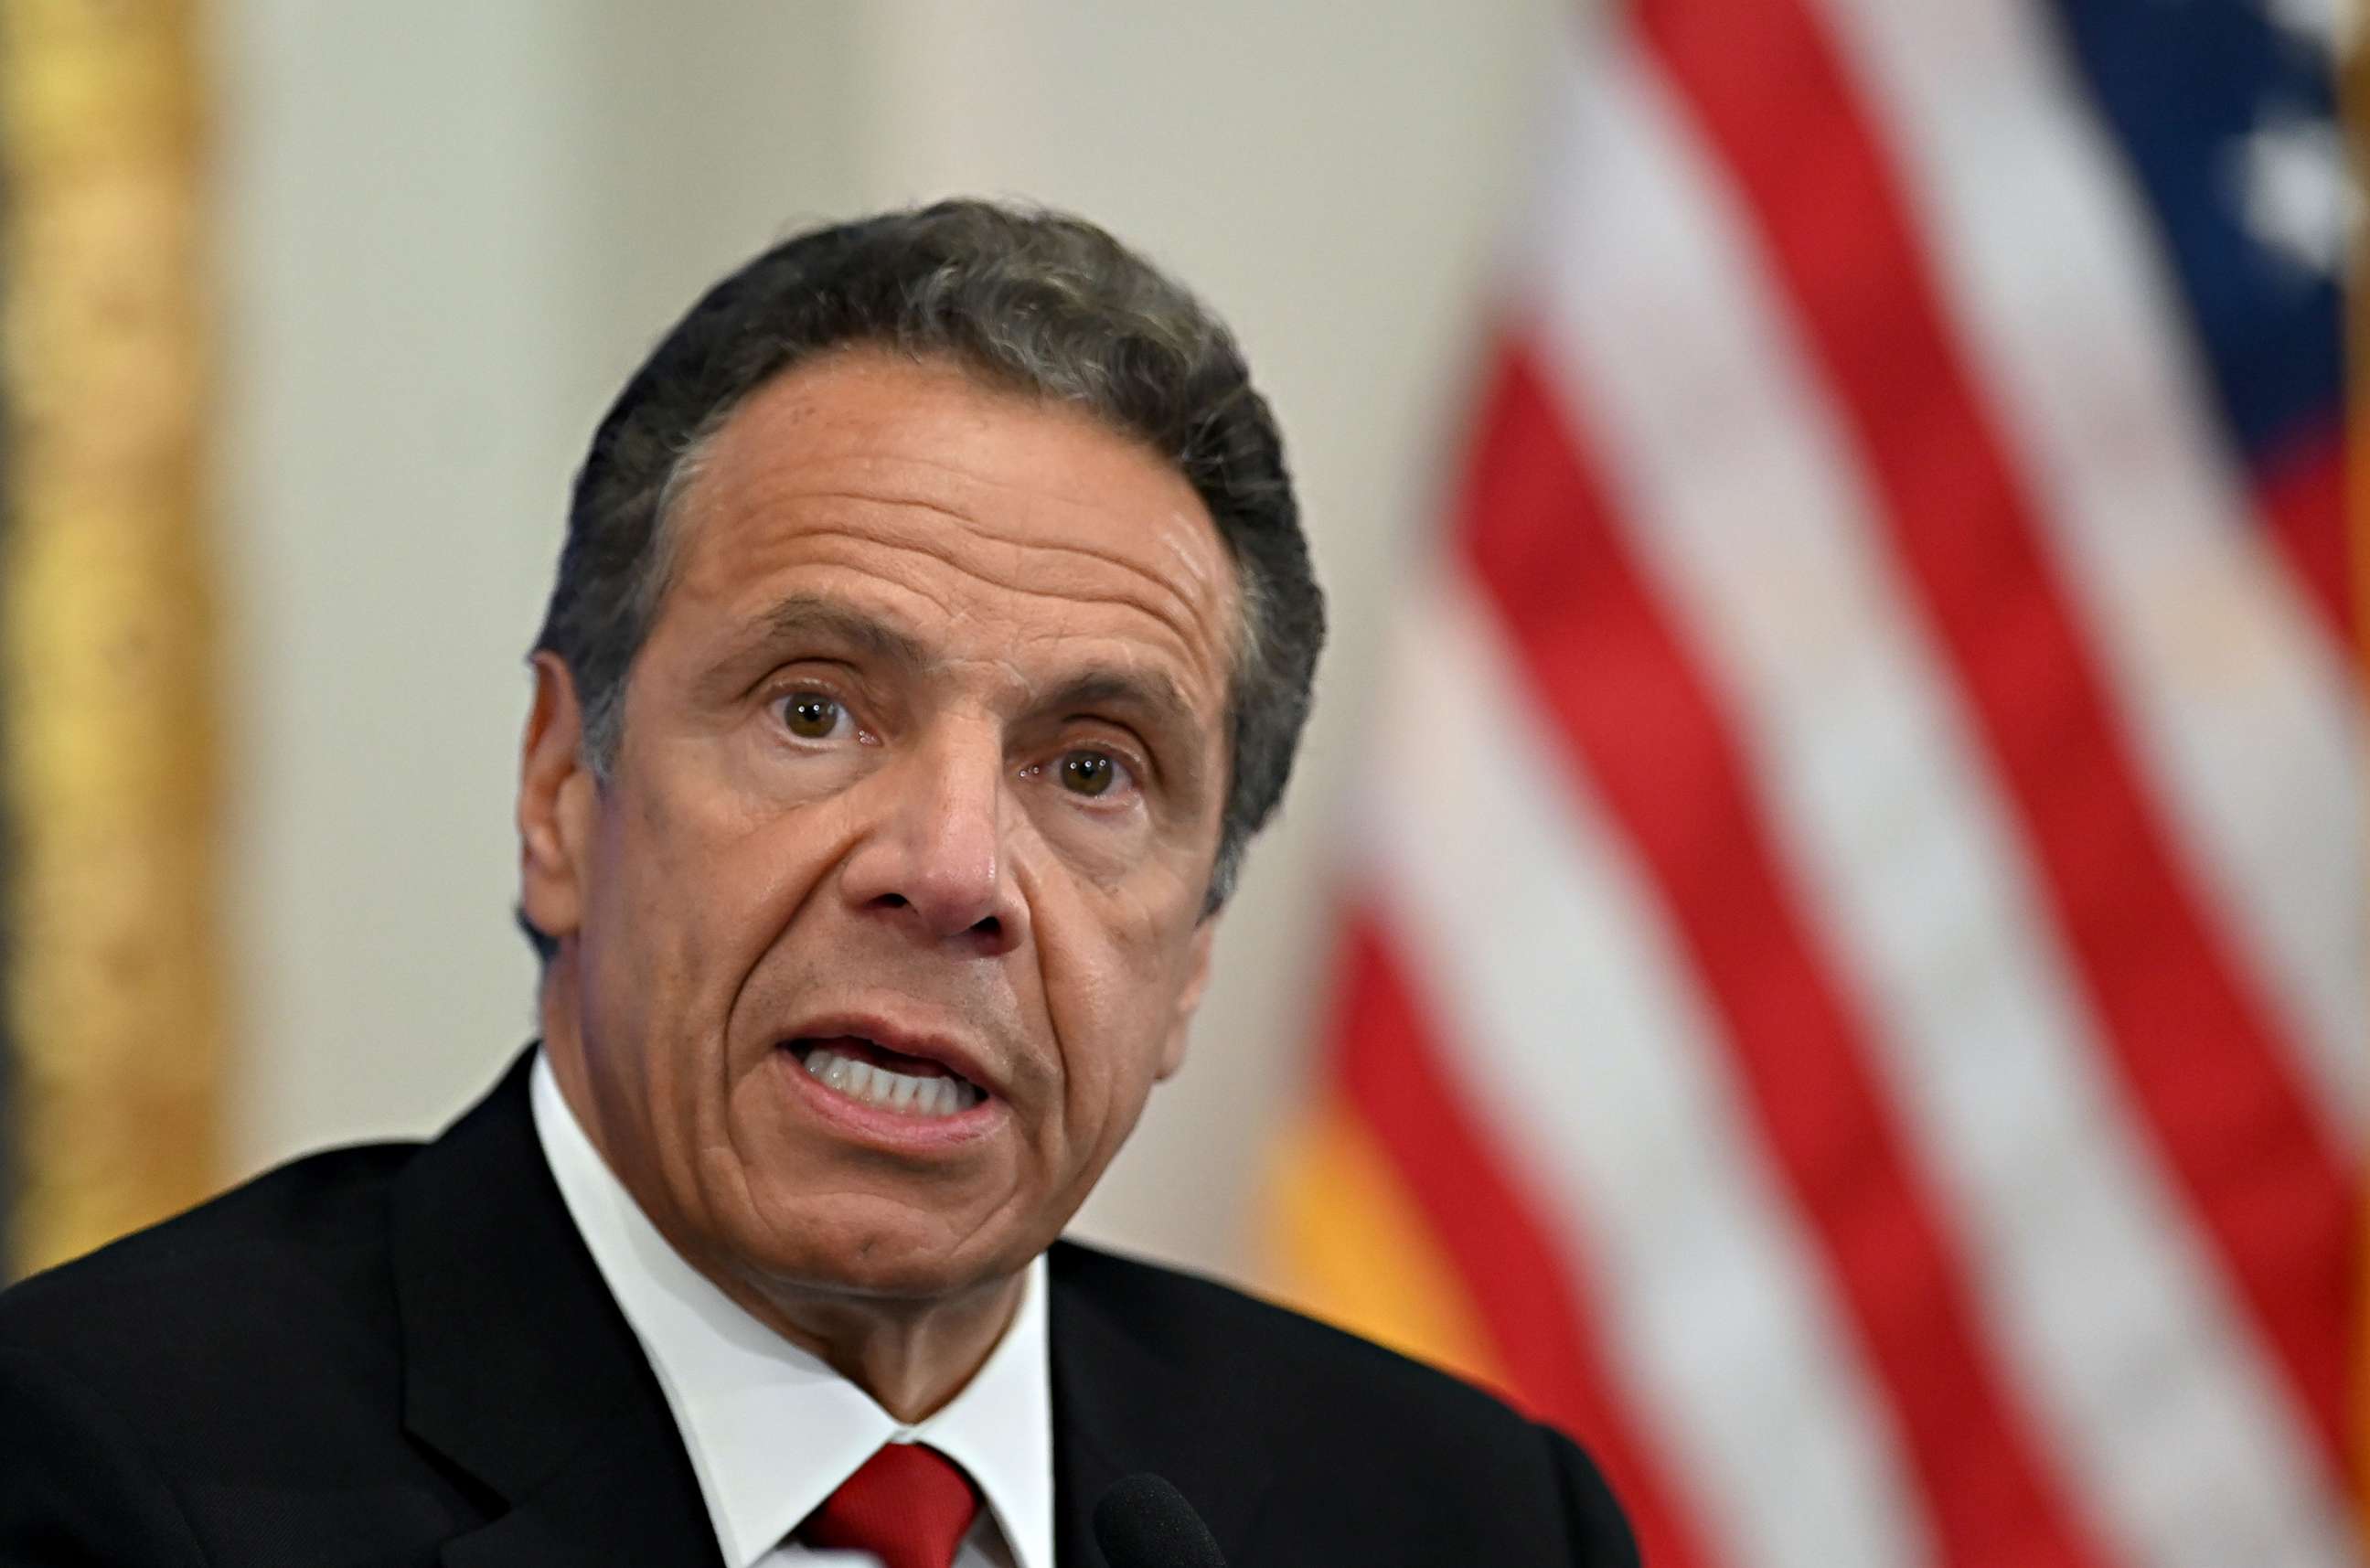 PHOTO: (Governor of New York Andrew Cuomo speaks during a press conference, May 26, 2020, in New York City.